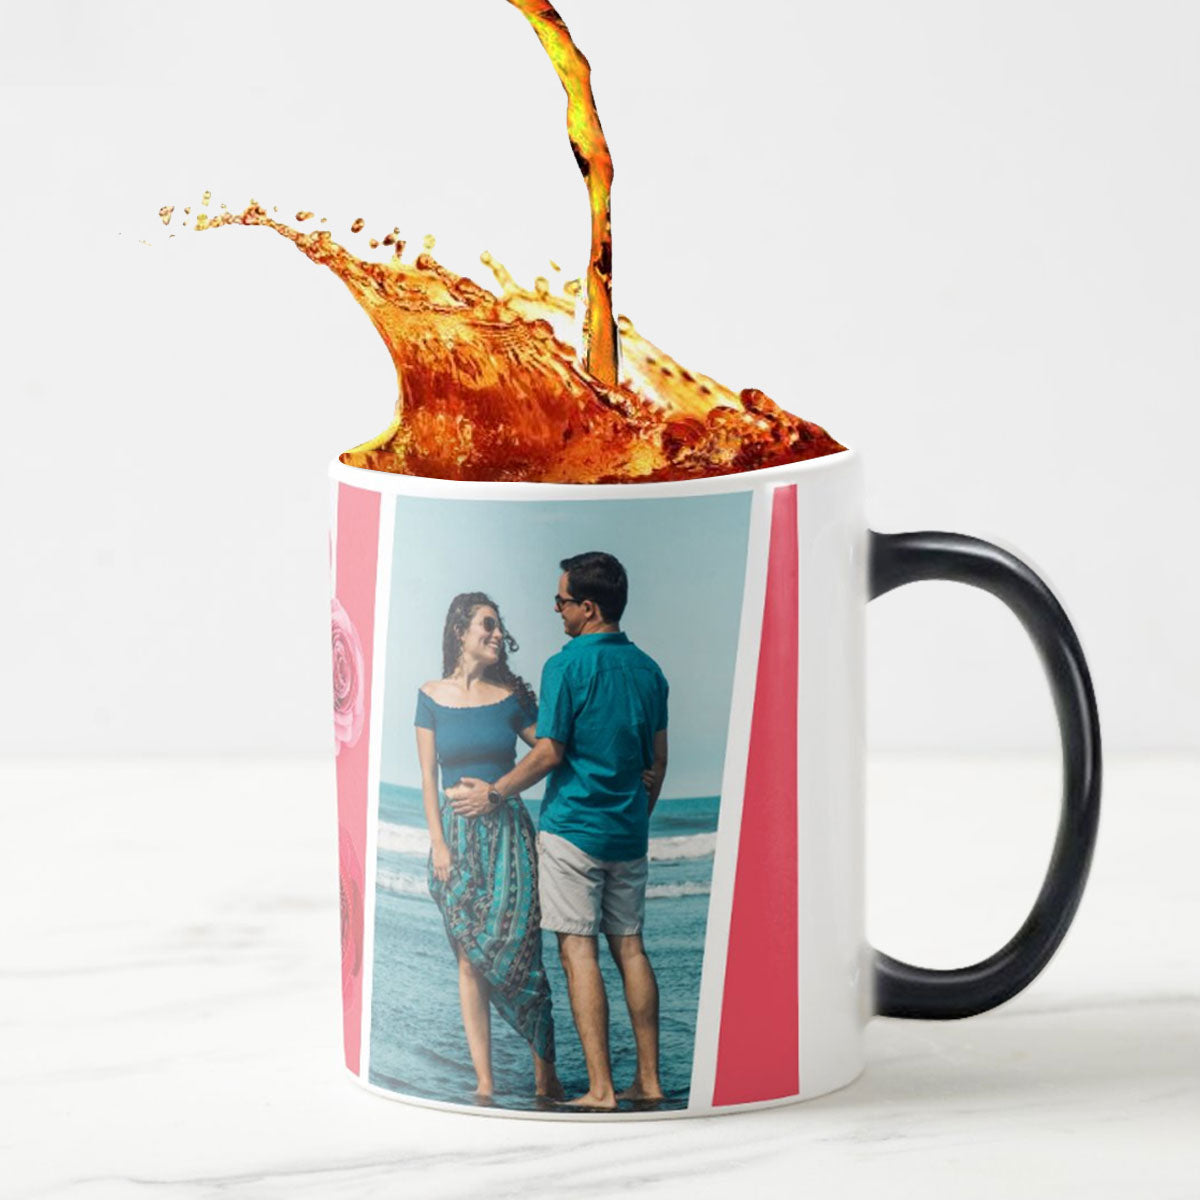 Photo Print On Mugs at 149 Only  Print Your Images on Coffee Mugs